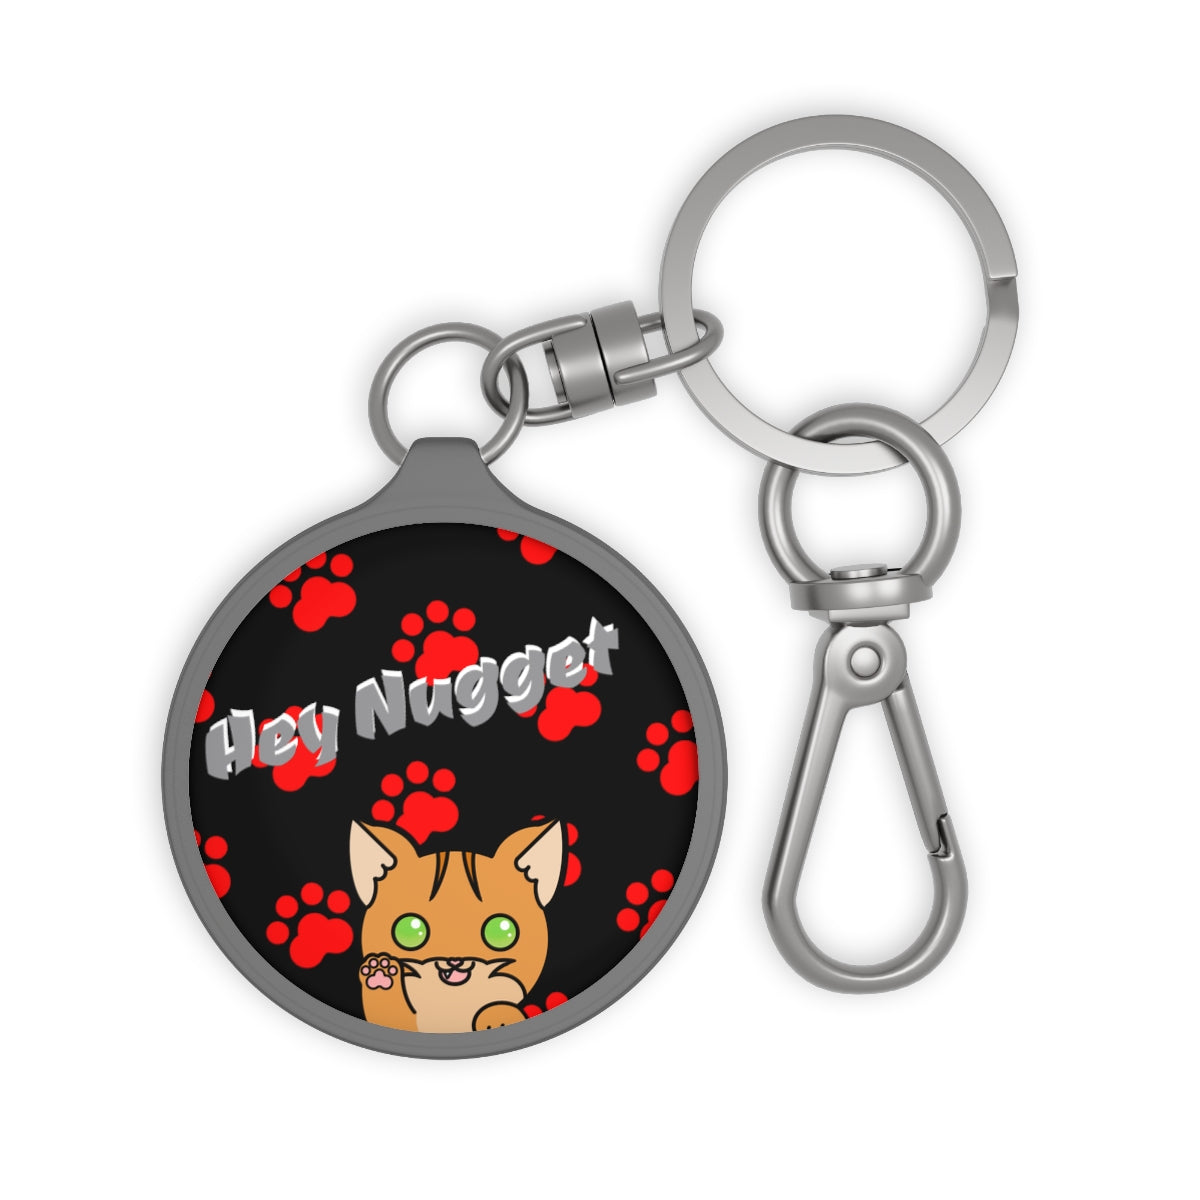 Stand out  with the  Keyring Tag  available at Hey Nugget. Grab yours today!